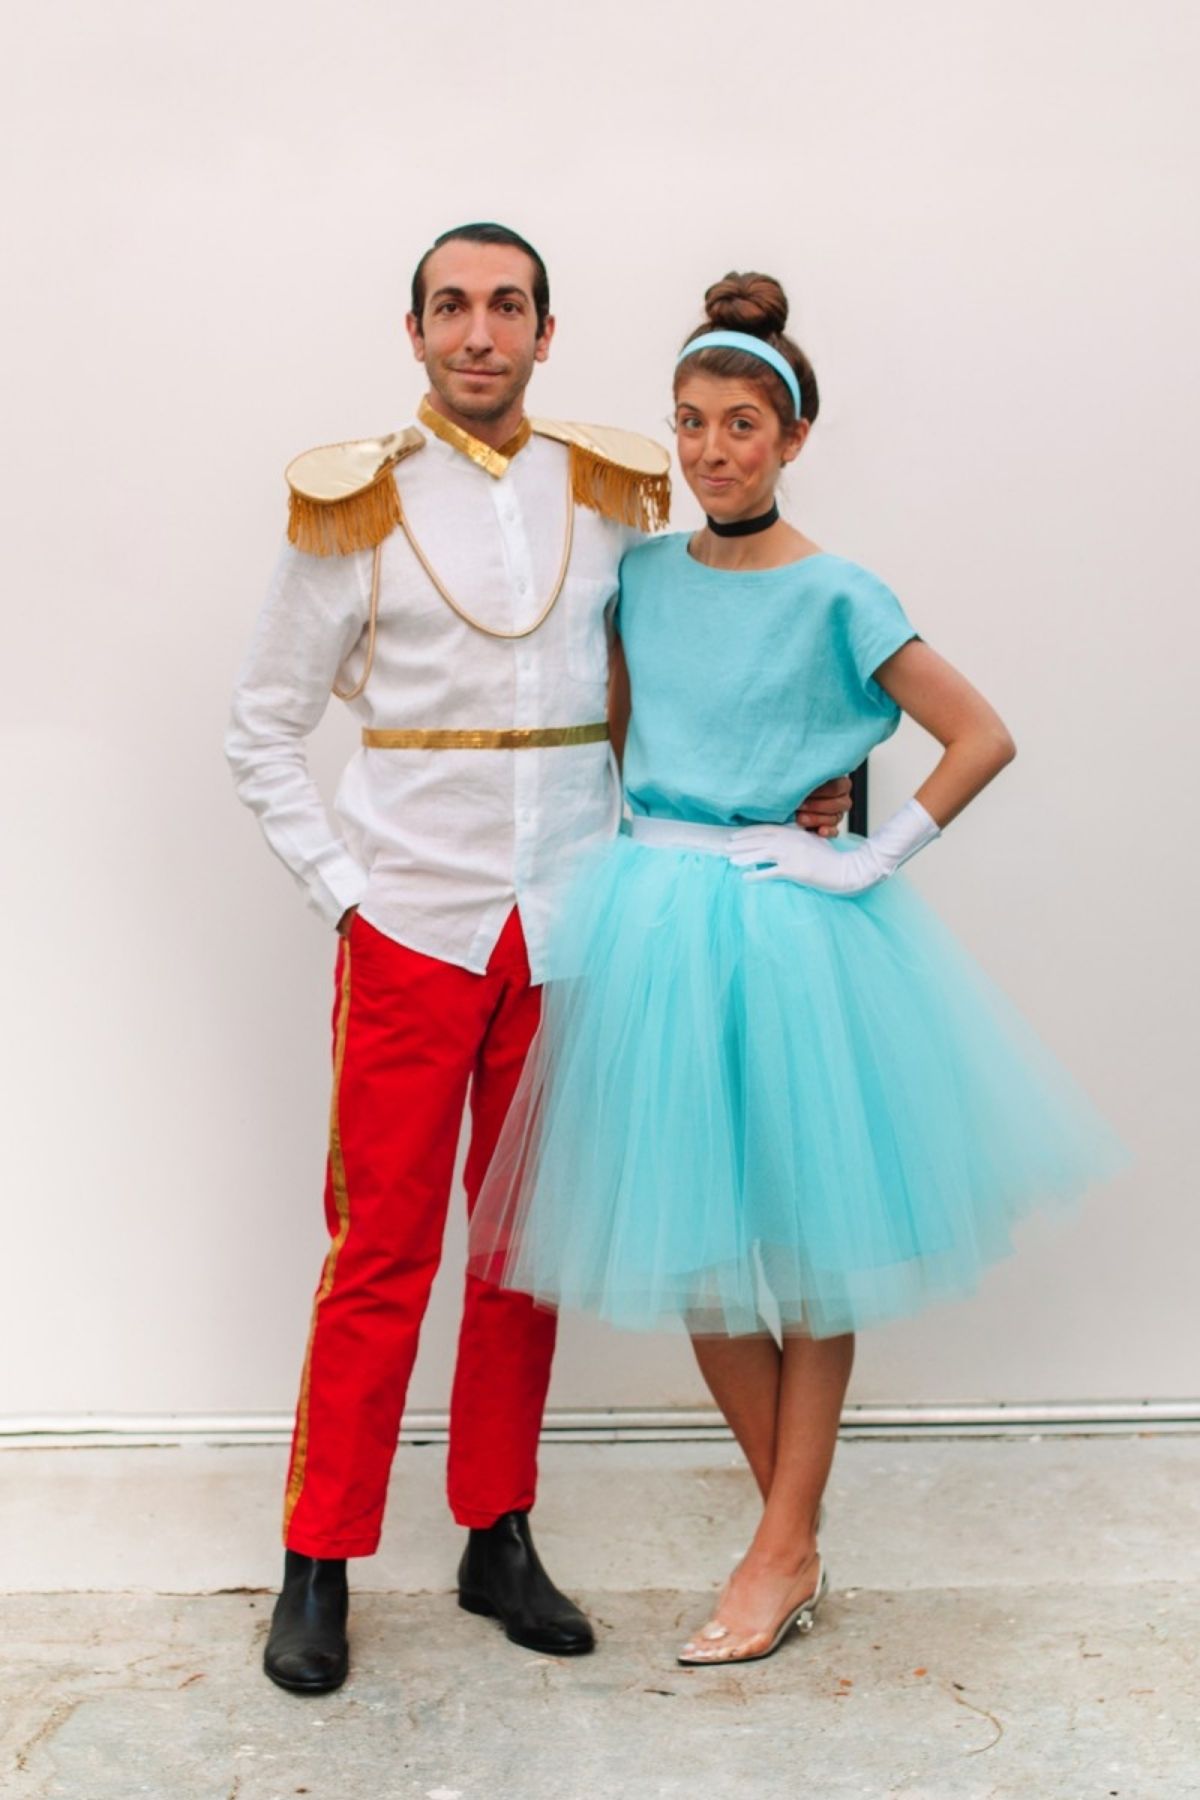 Cinderella And Prince Charming couples halloween costumes